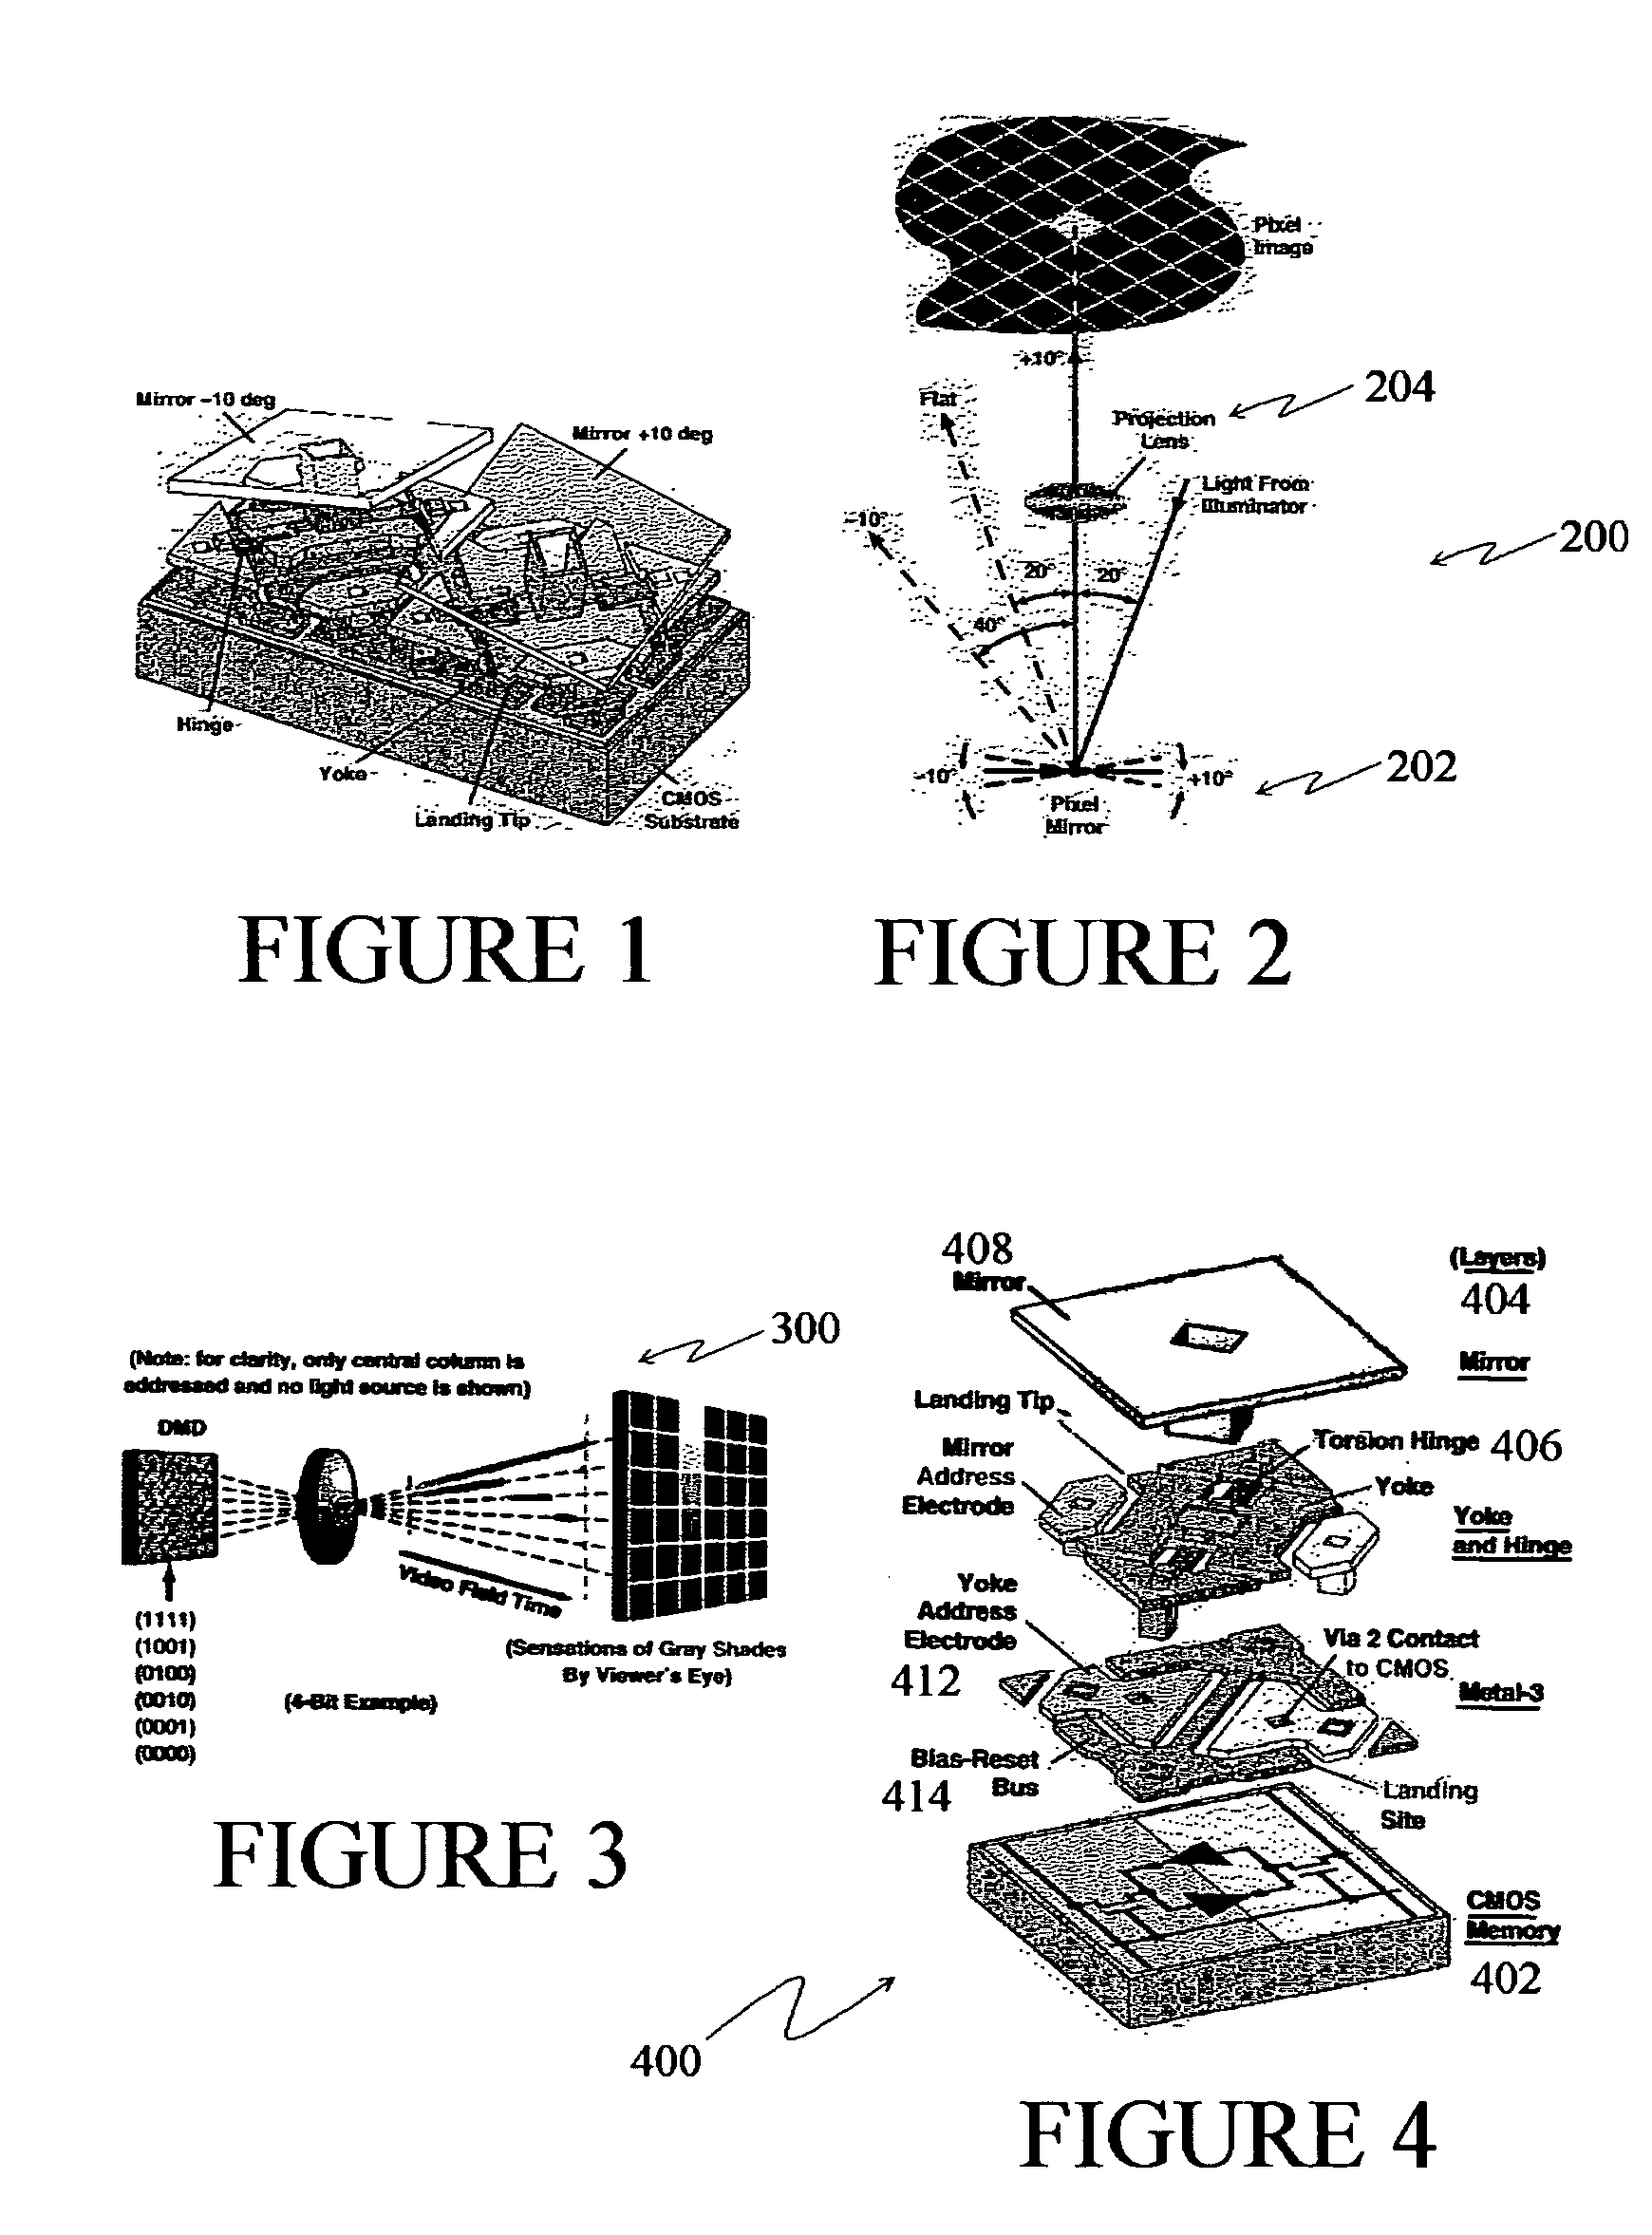 Method and apparatus for stereoscopic display using column interleaved data with digital light processing